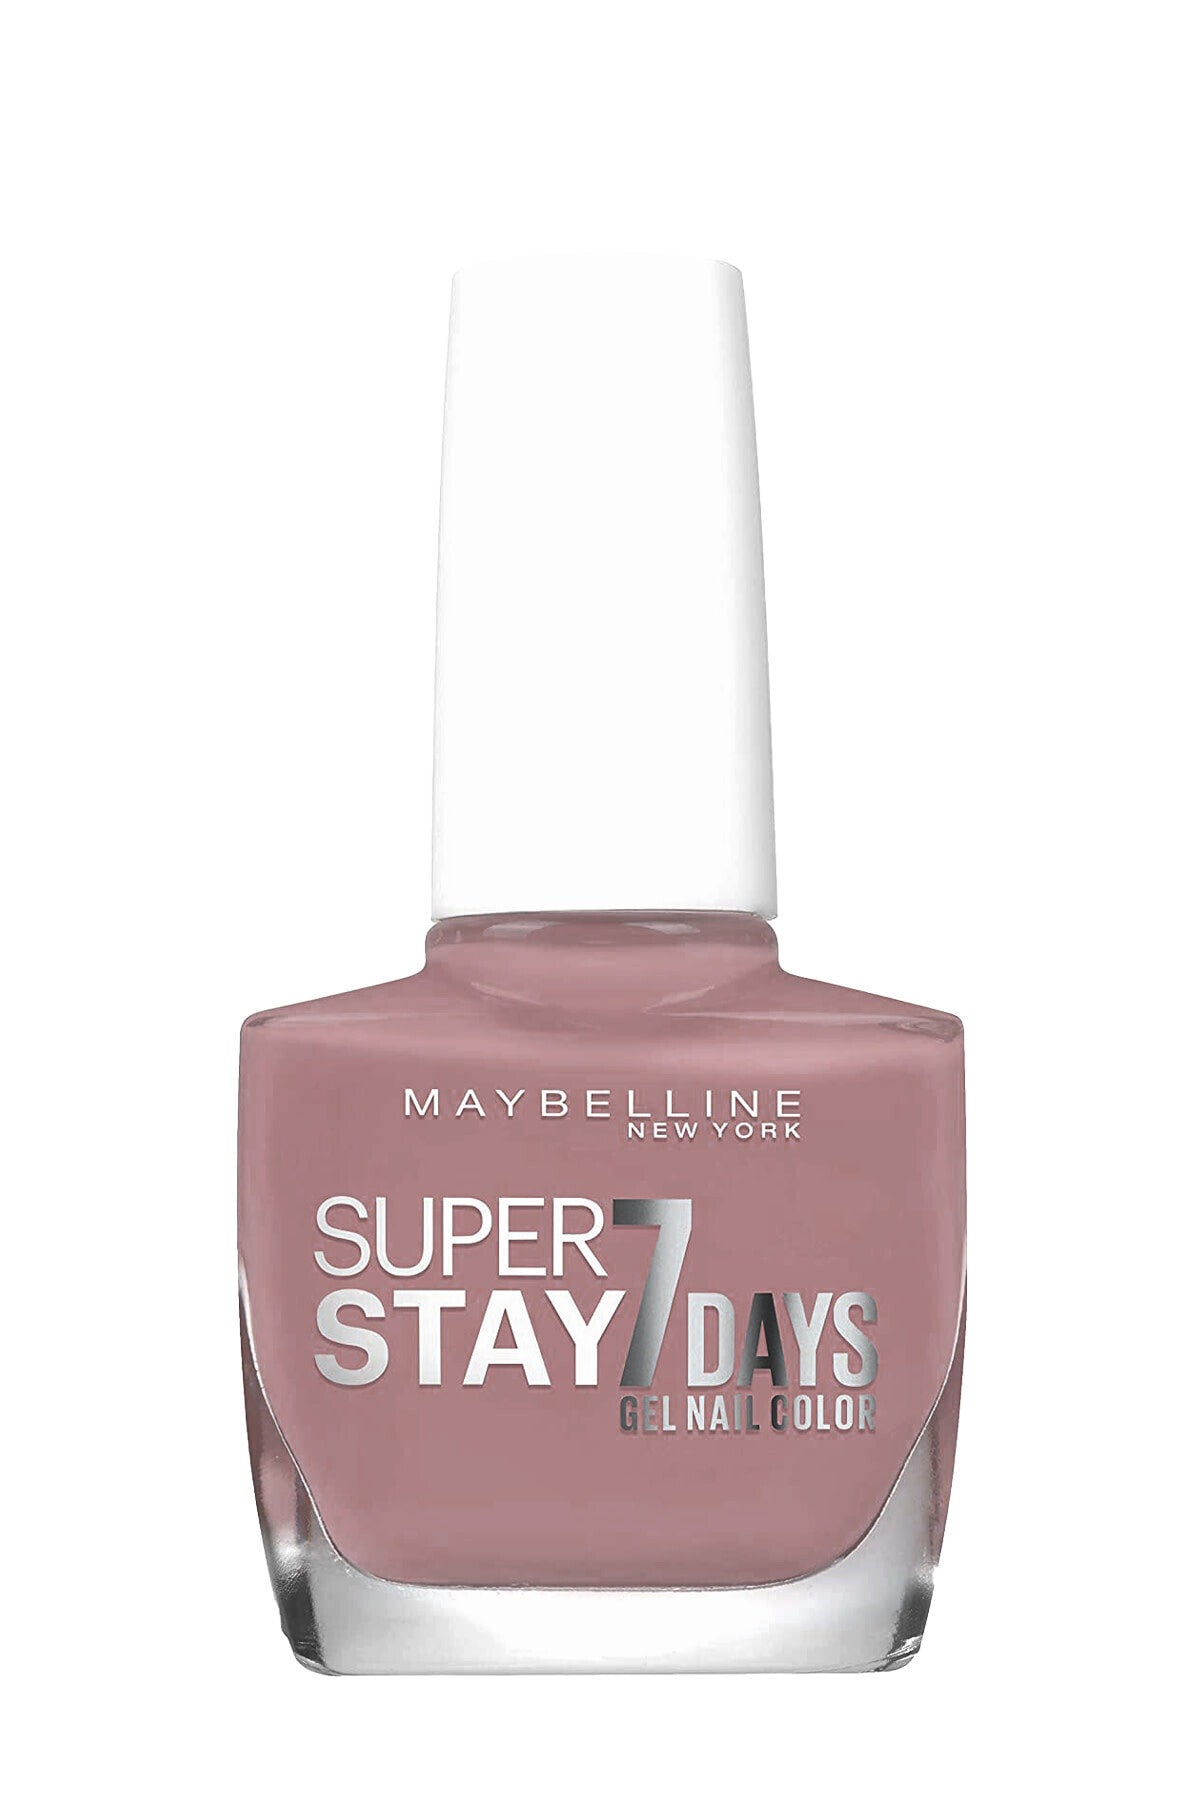 — 7 Superstay 931 Brownstone Beautynstyle Days Polish Gel Maybelline Nail